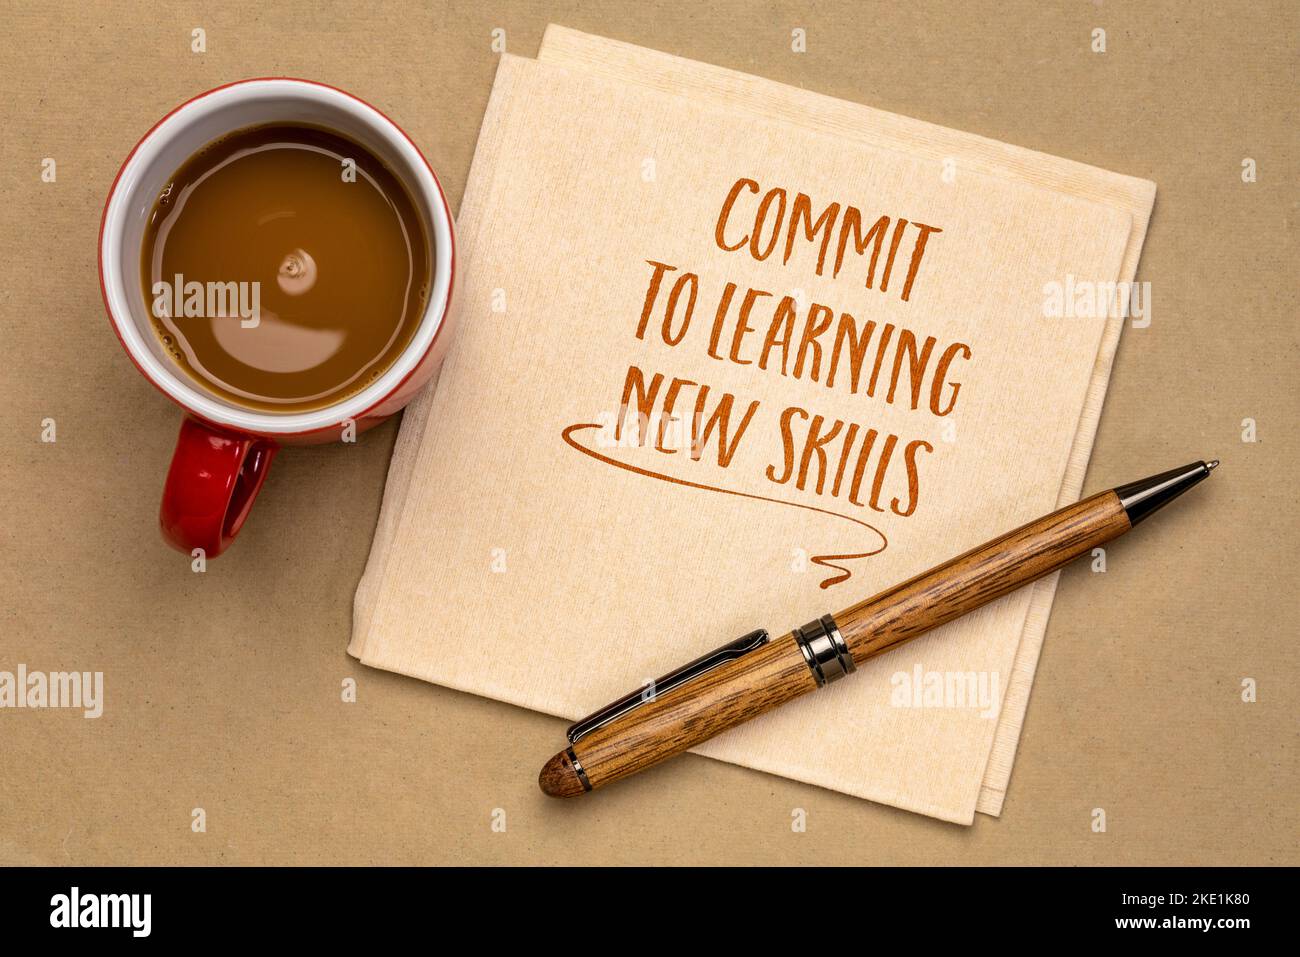 commit to learning new skills - motivational advice or reminder on a napkin with coffee, continuing education and personal development concept Stock Photo